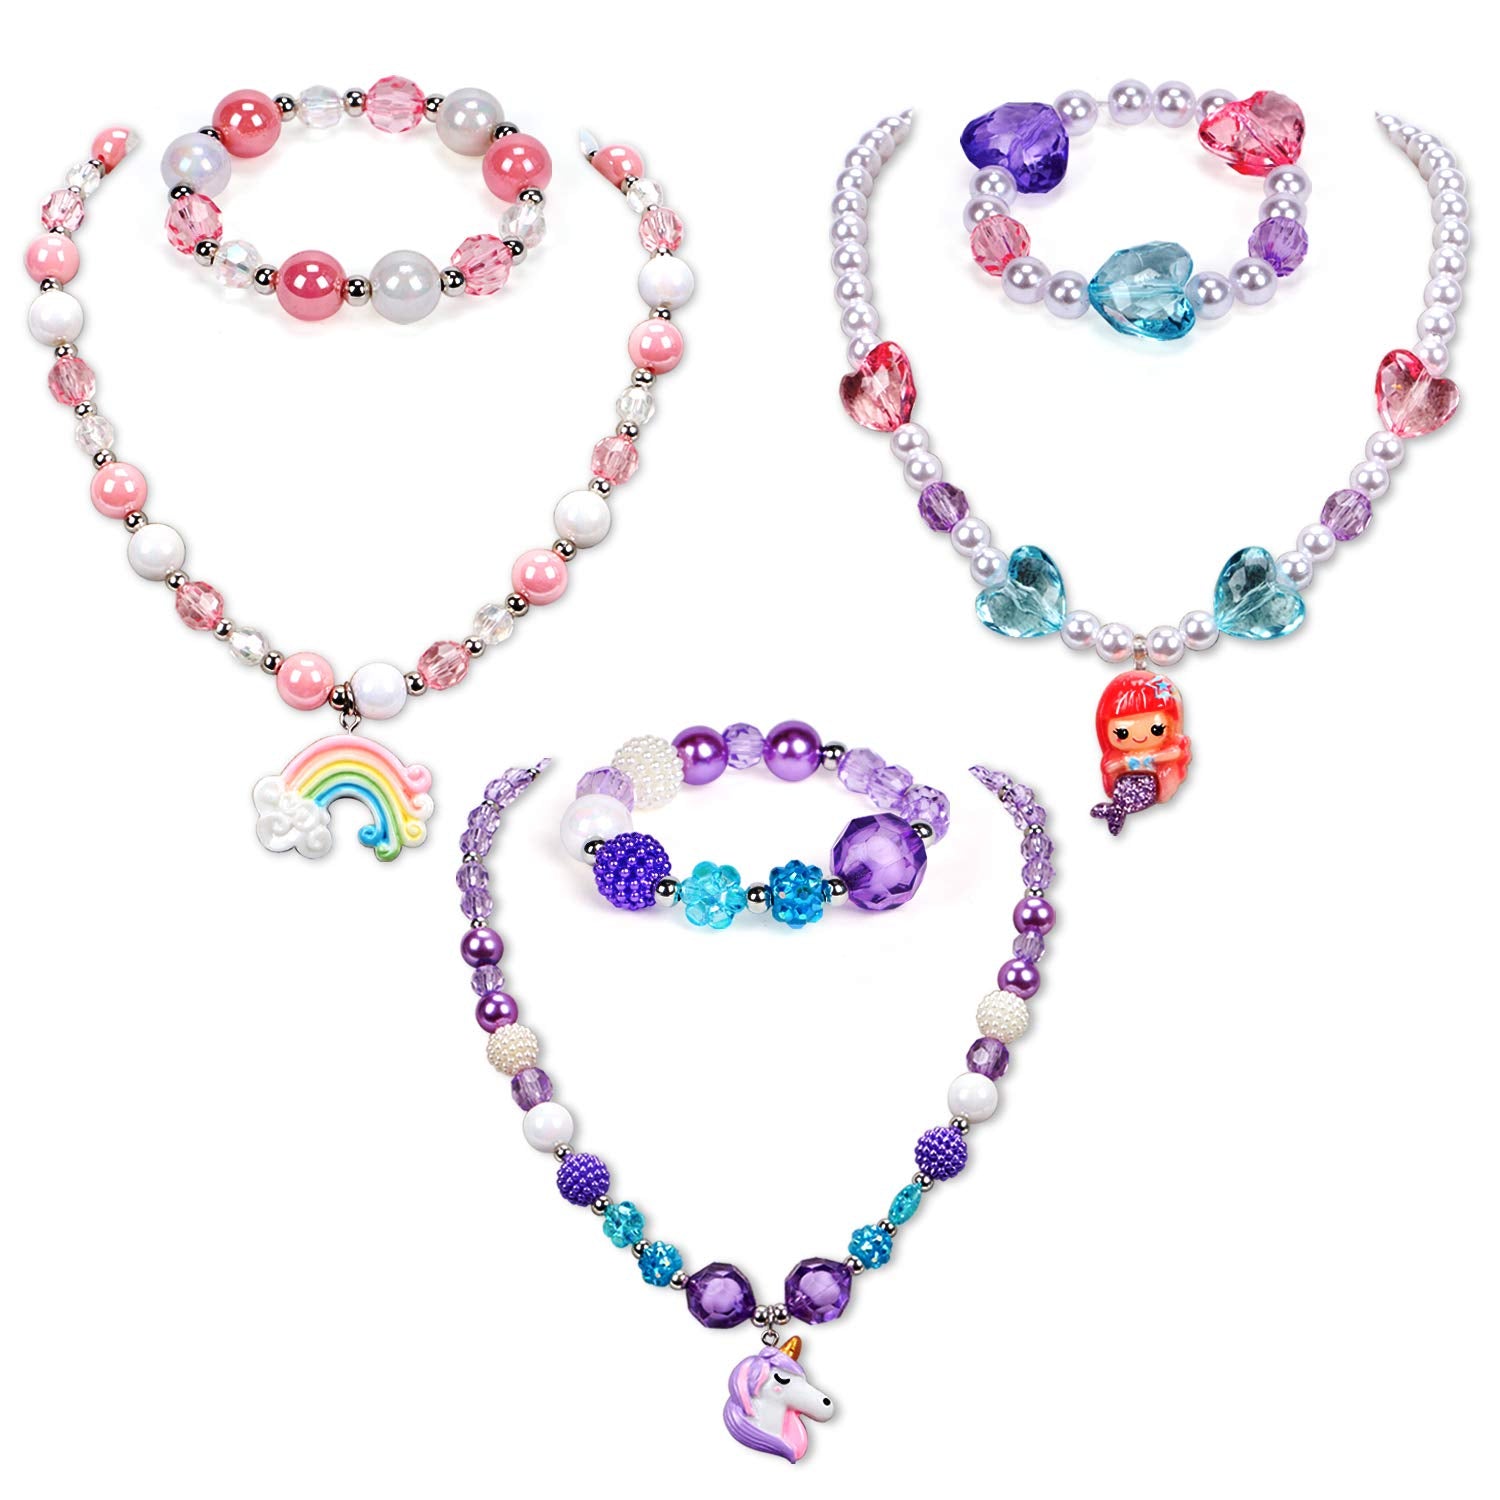 G.C 3 Sets Girl Princess Necklace Bracelet with Colorful Unicorn Mermaid Rainbow Pendant Kids Stretchy Chunky Costume Jewelry Gift Party Favors Dress up Jewelry for Little Girl Toddler(with Gift Box)